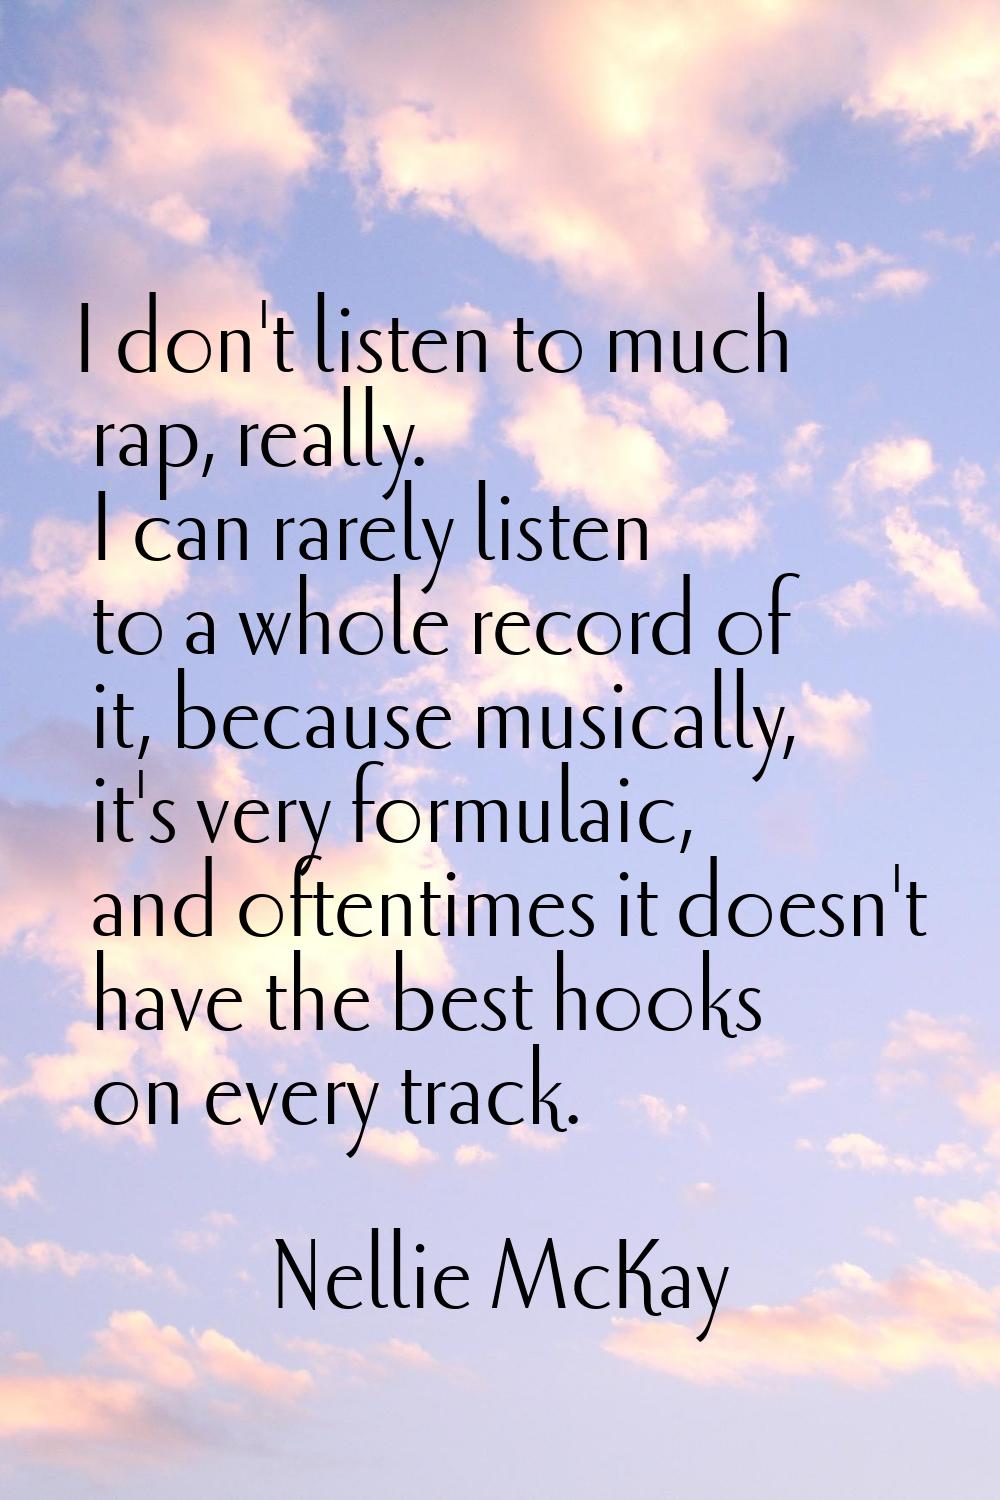 I don't listen to much rap, really. I can rarely listen to a whole record of it, because musically,